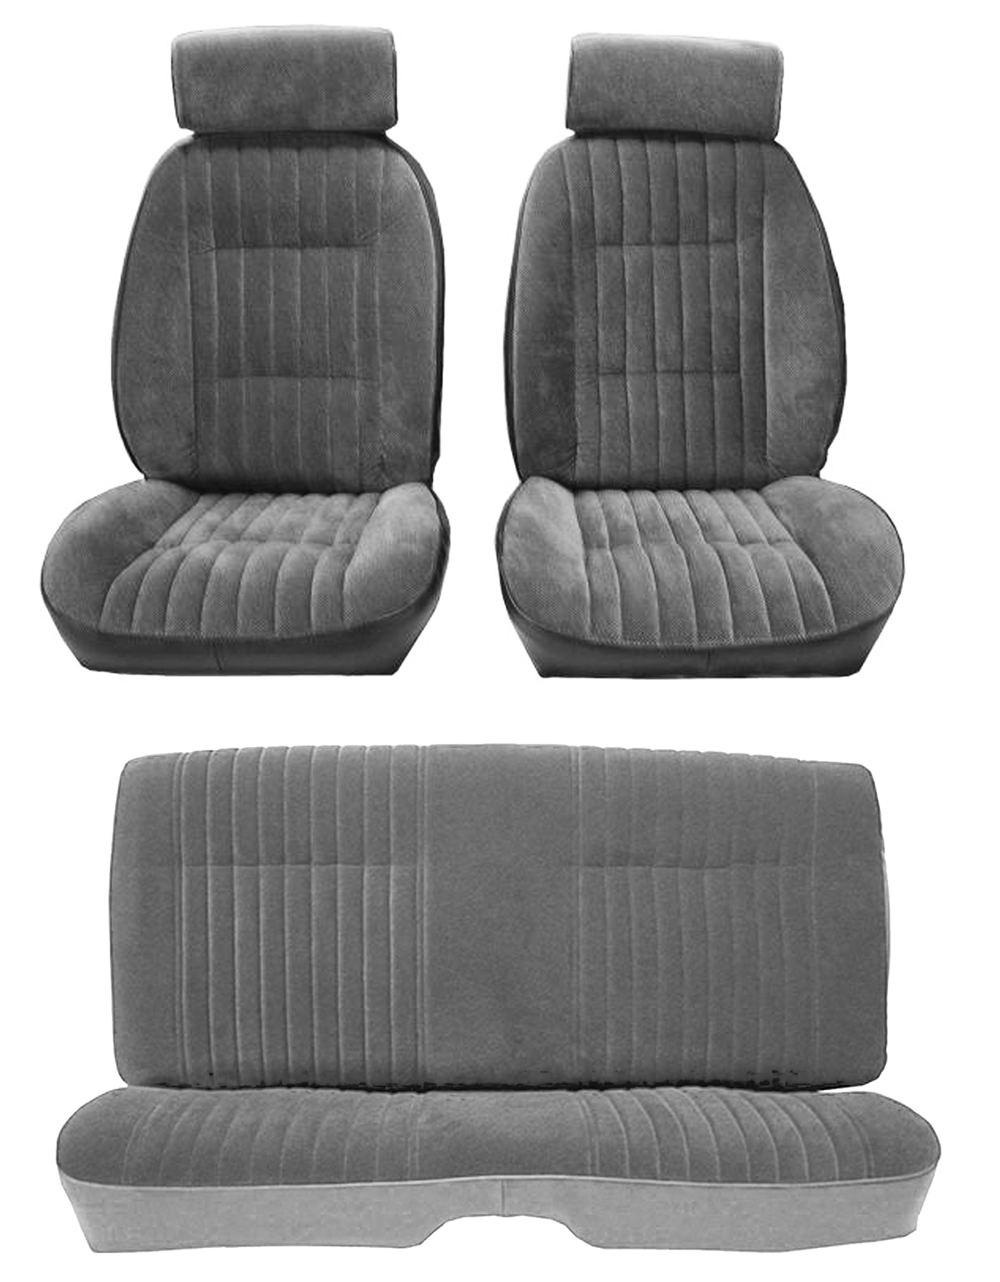 81-88 Monte Carlo SS Front Bucket and Rear Seat Covers Gray Vinyl